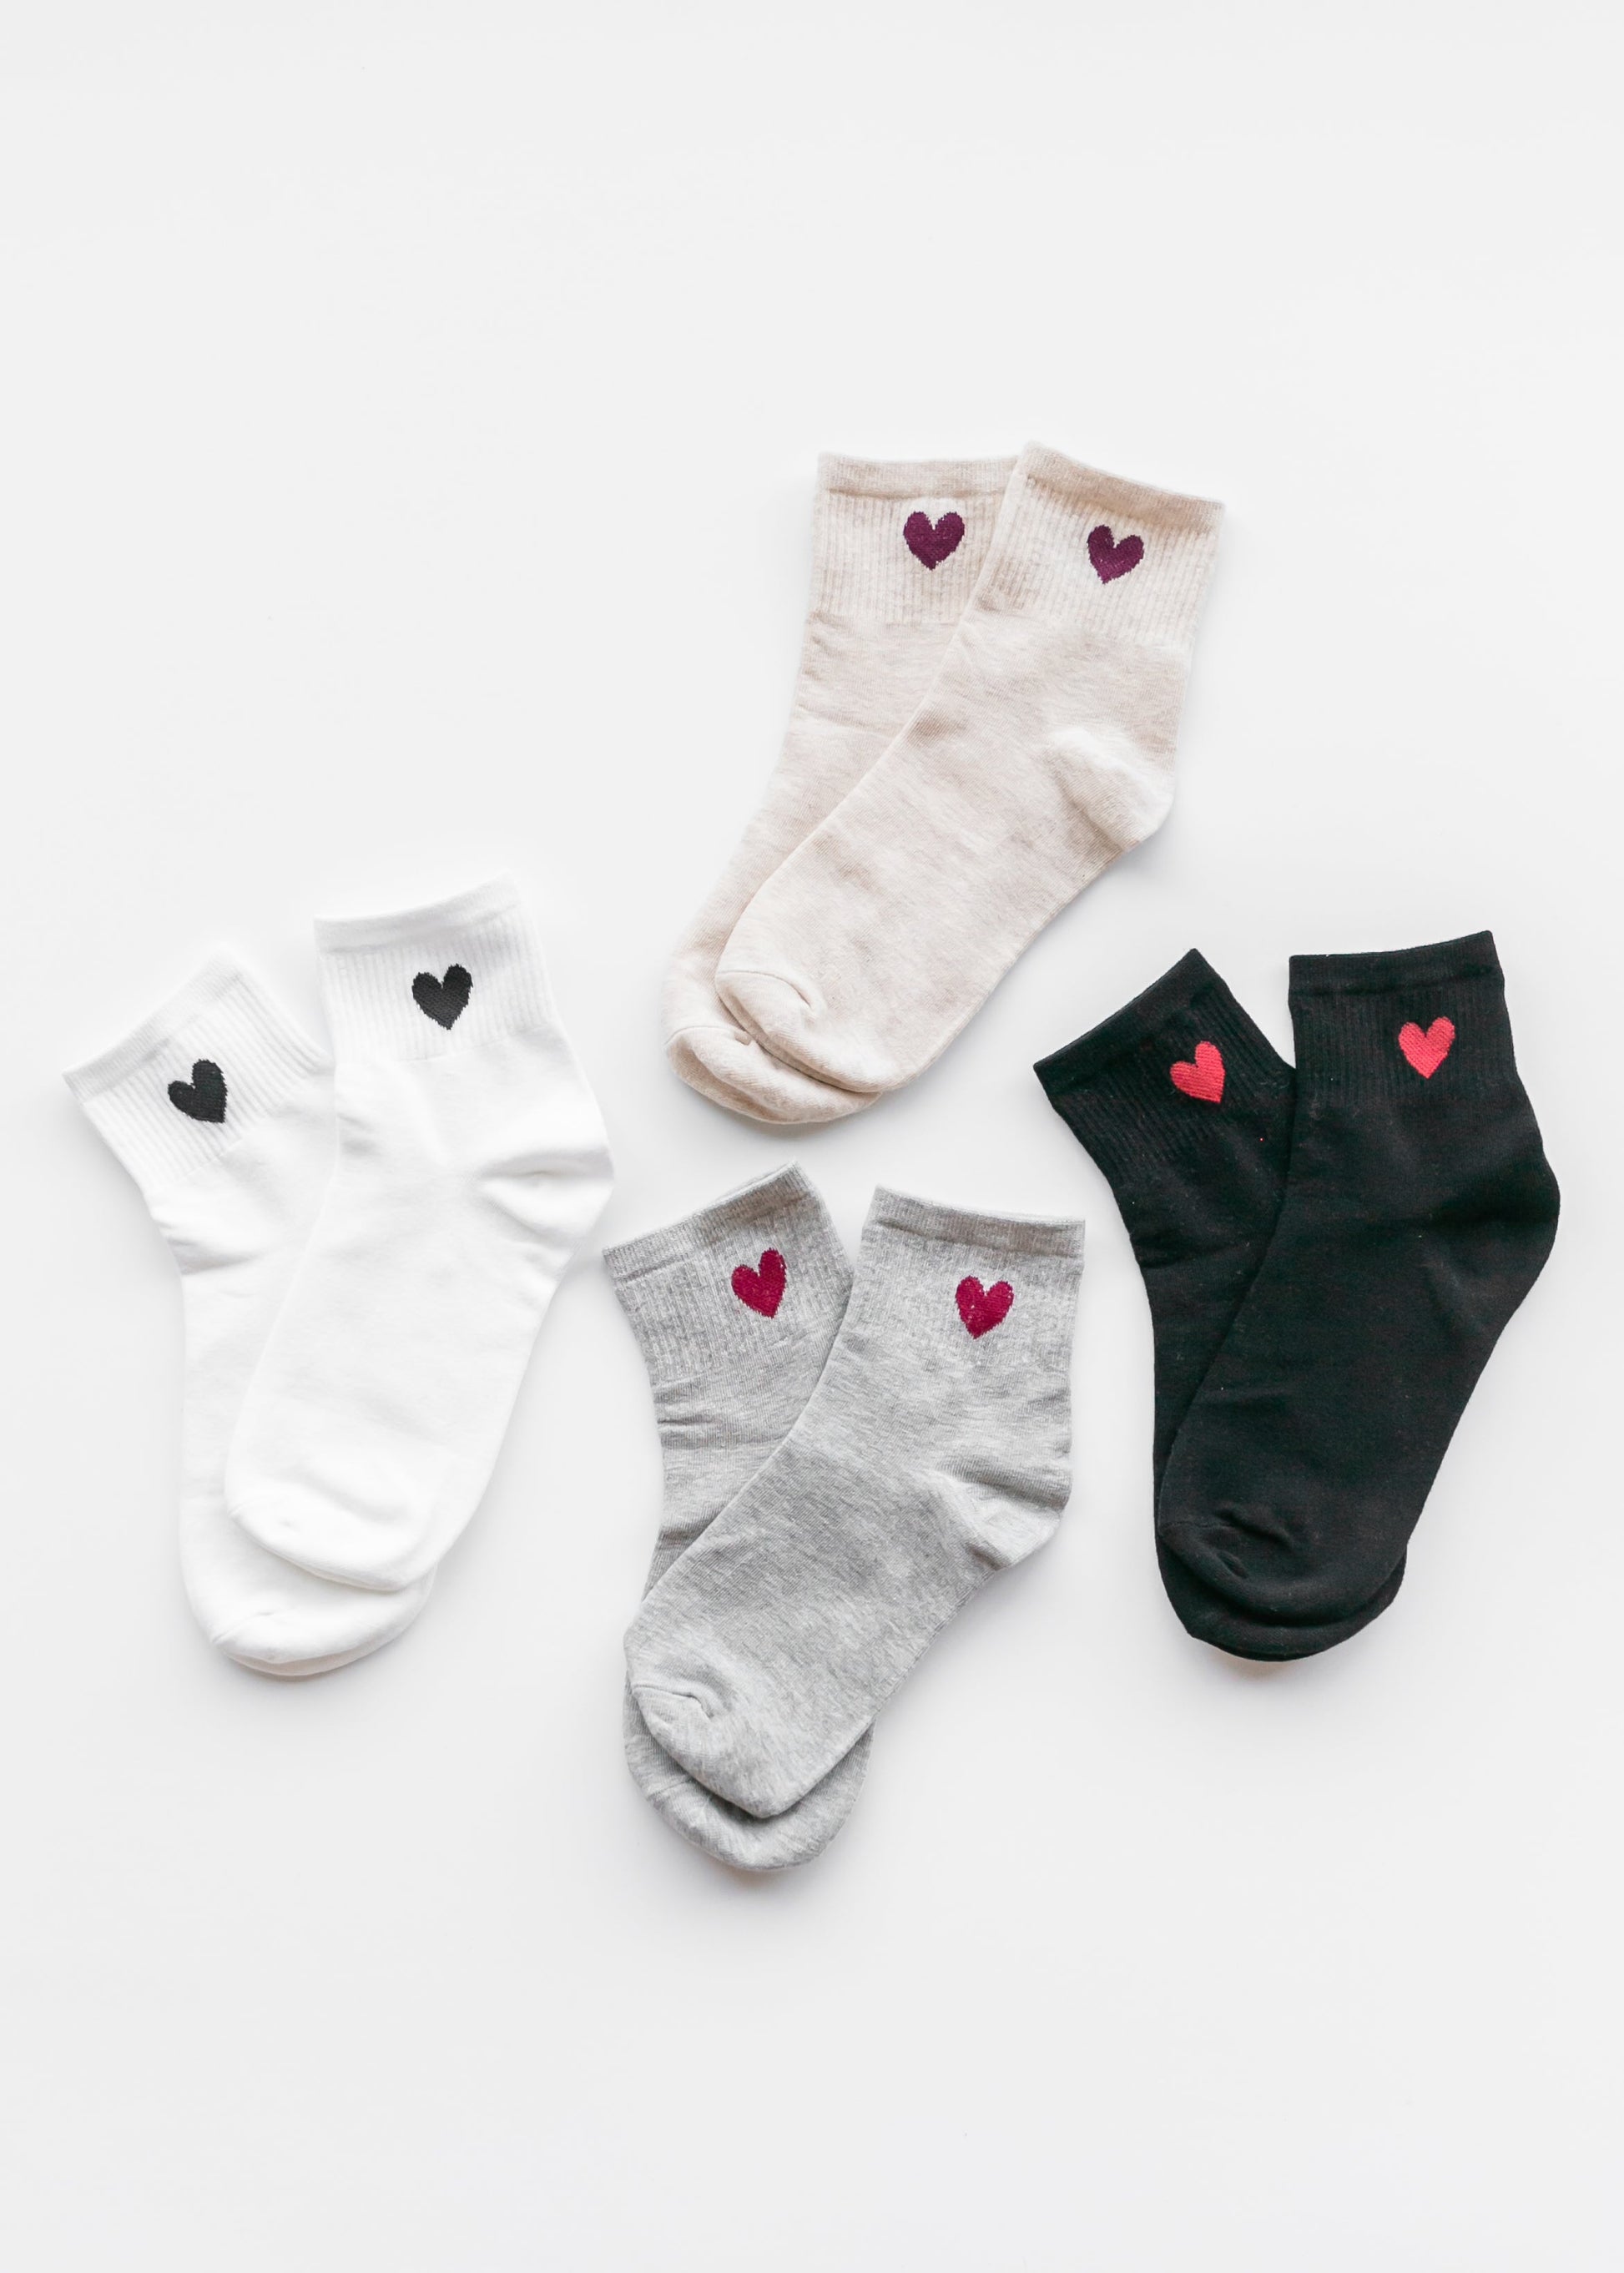 Heart Printed Ankle Socks Accessories